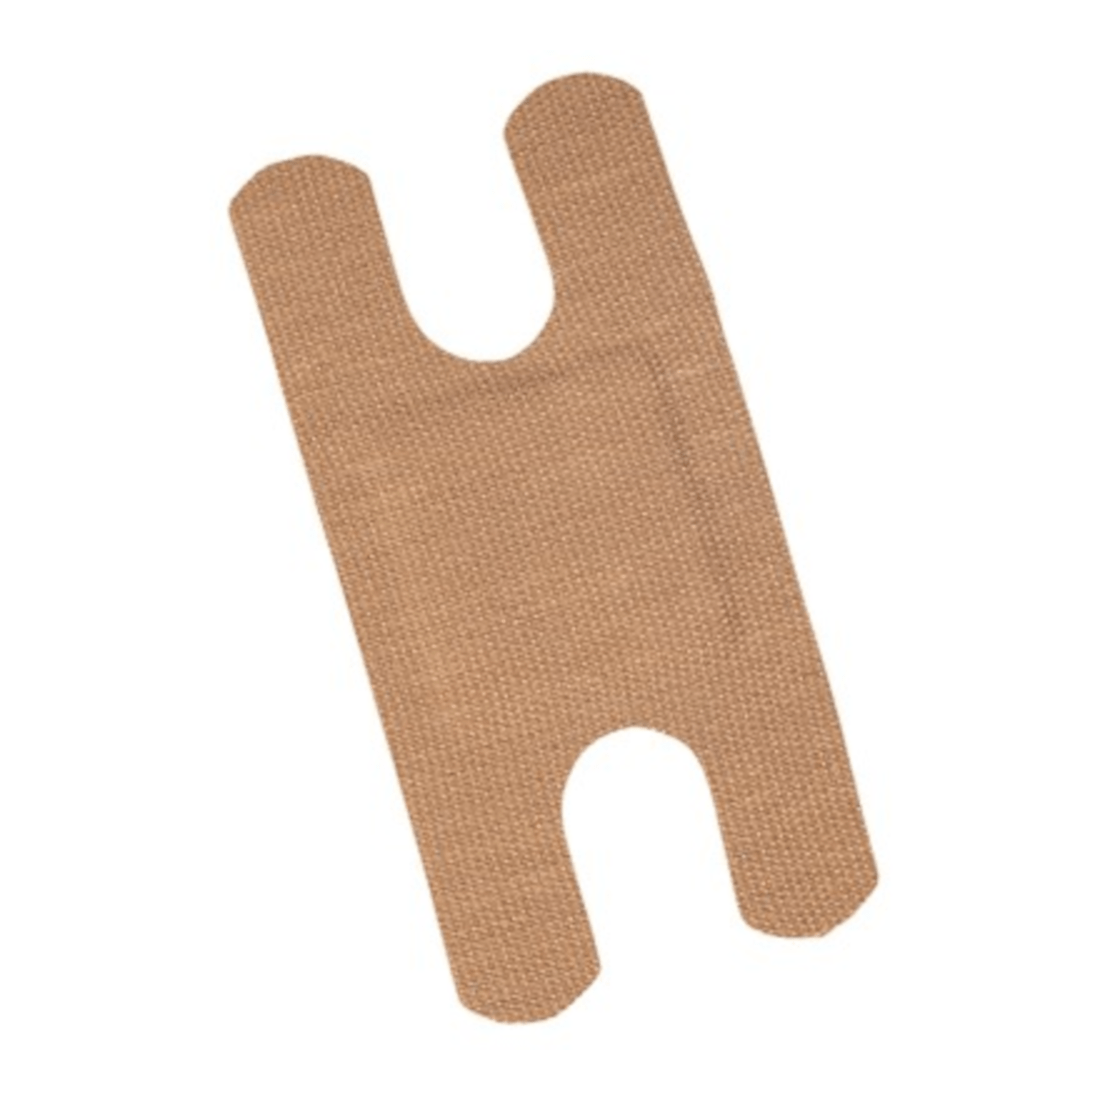 Adhesive bandages, sterile, knuckle